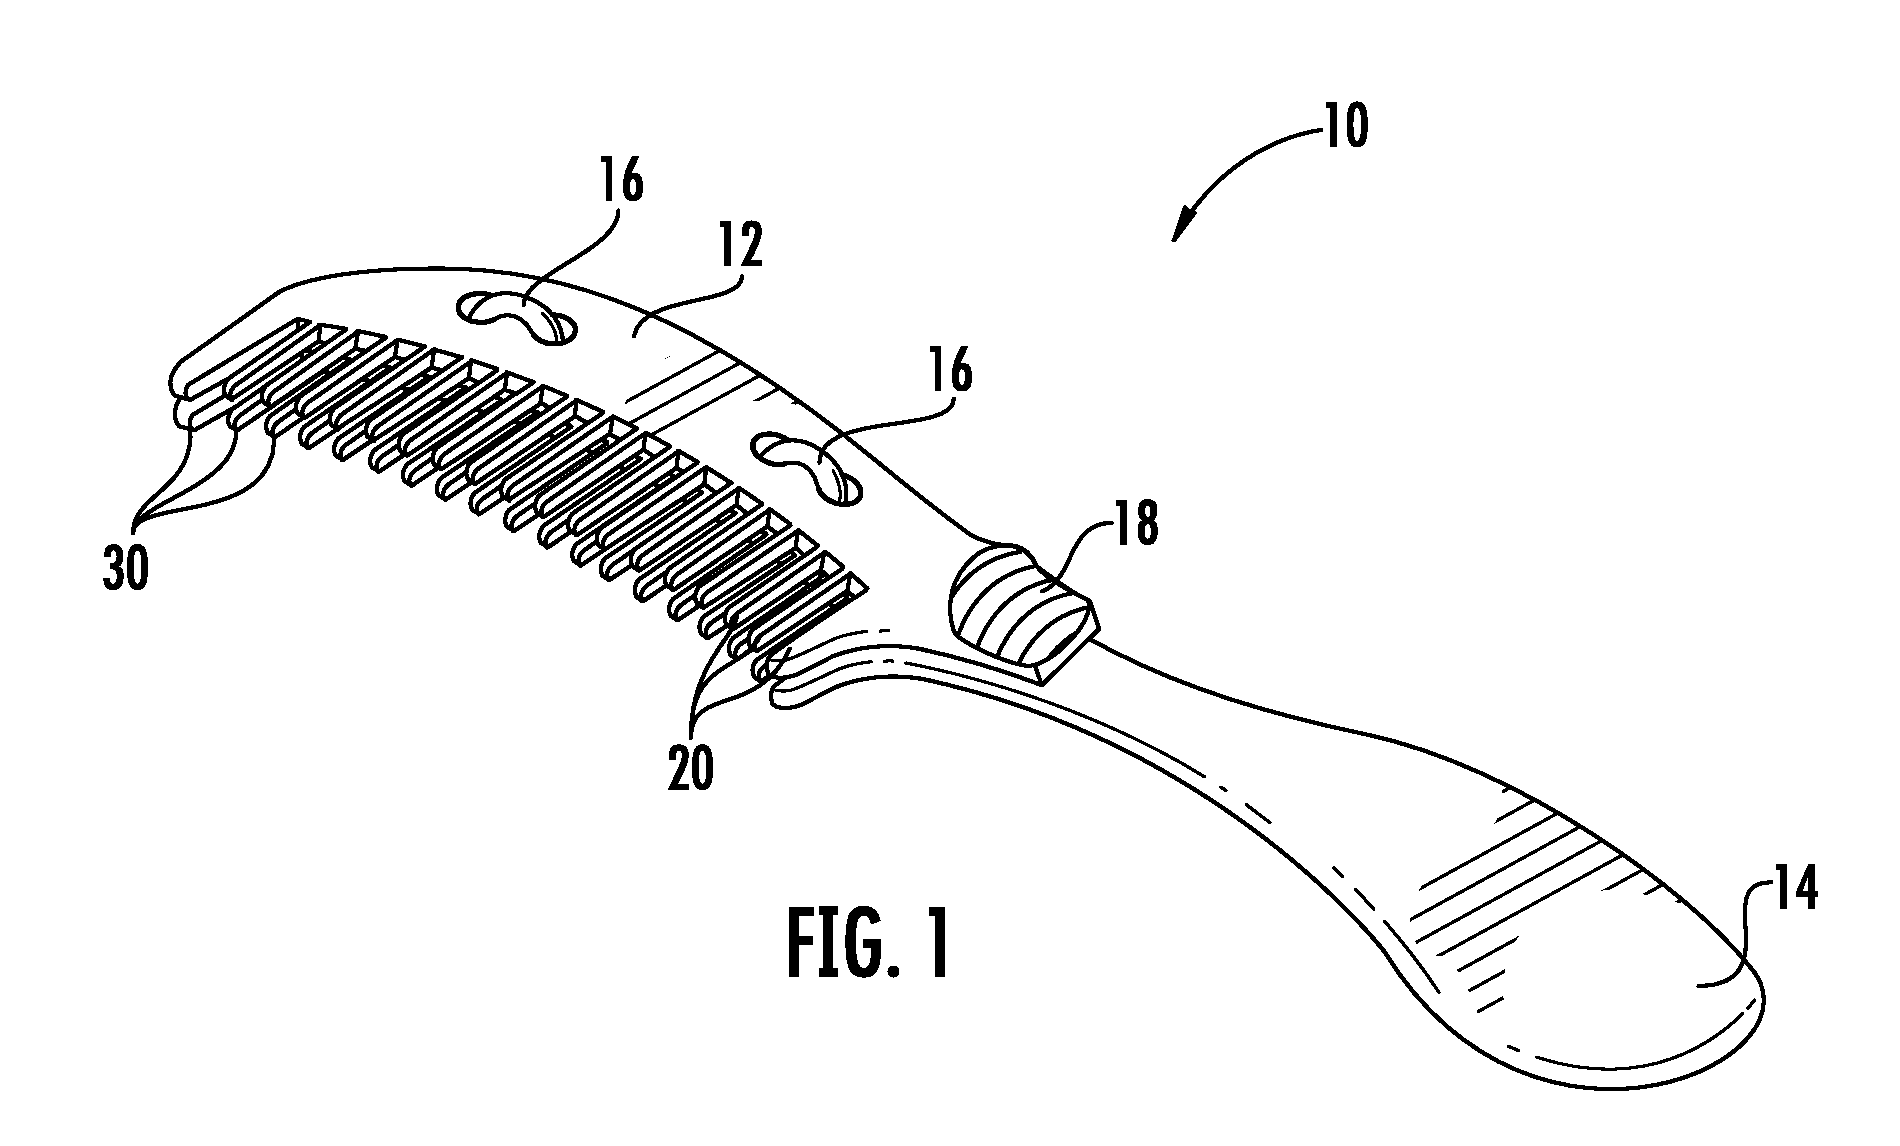 Systems and methods for combing, drying, and straightening hair